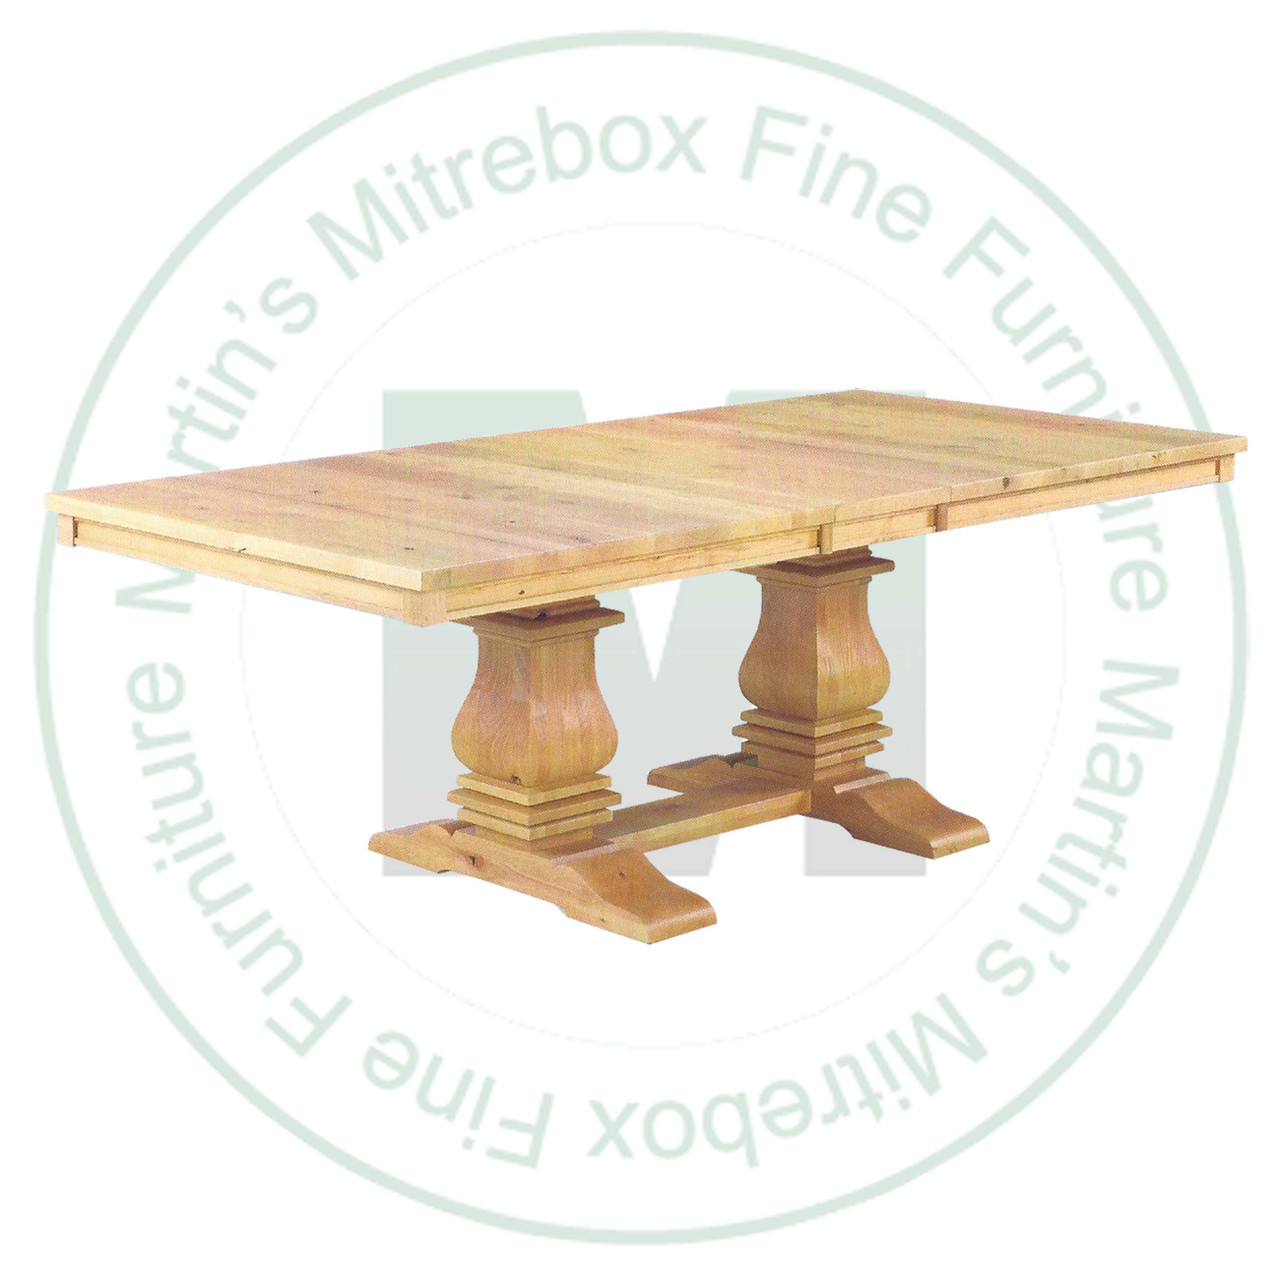 Maple Mediterranean Double Pedestal Table 42''D x 84''W x 30''H With 4 - 12'' Leaves. Table Has 1.25'' Thick Top